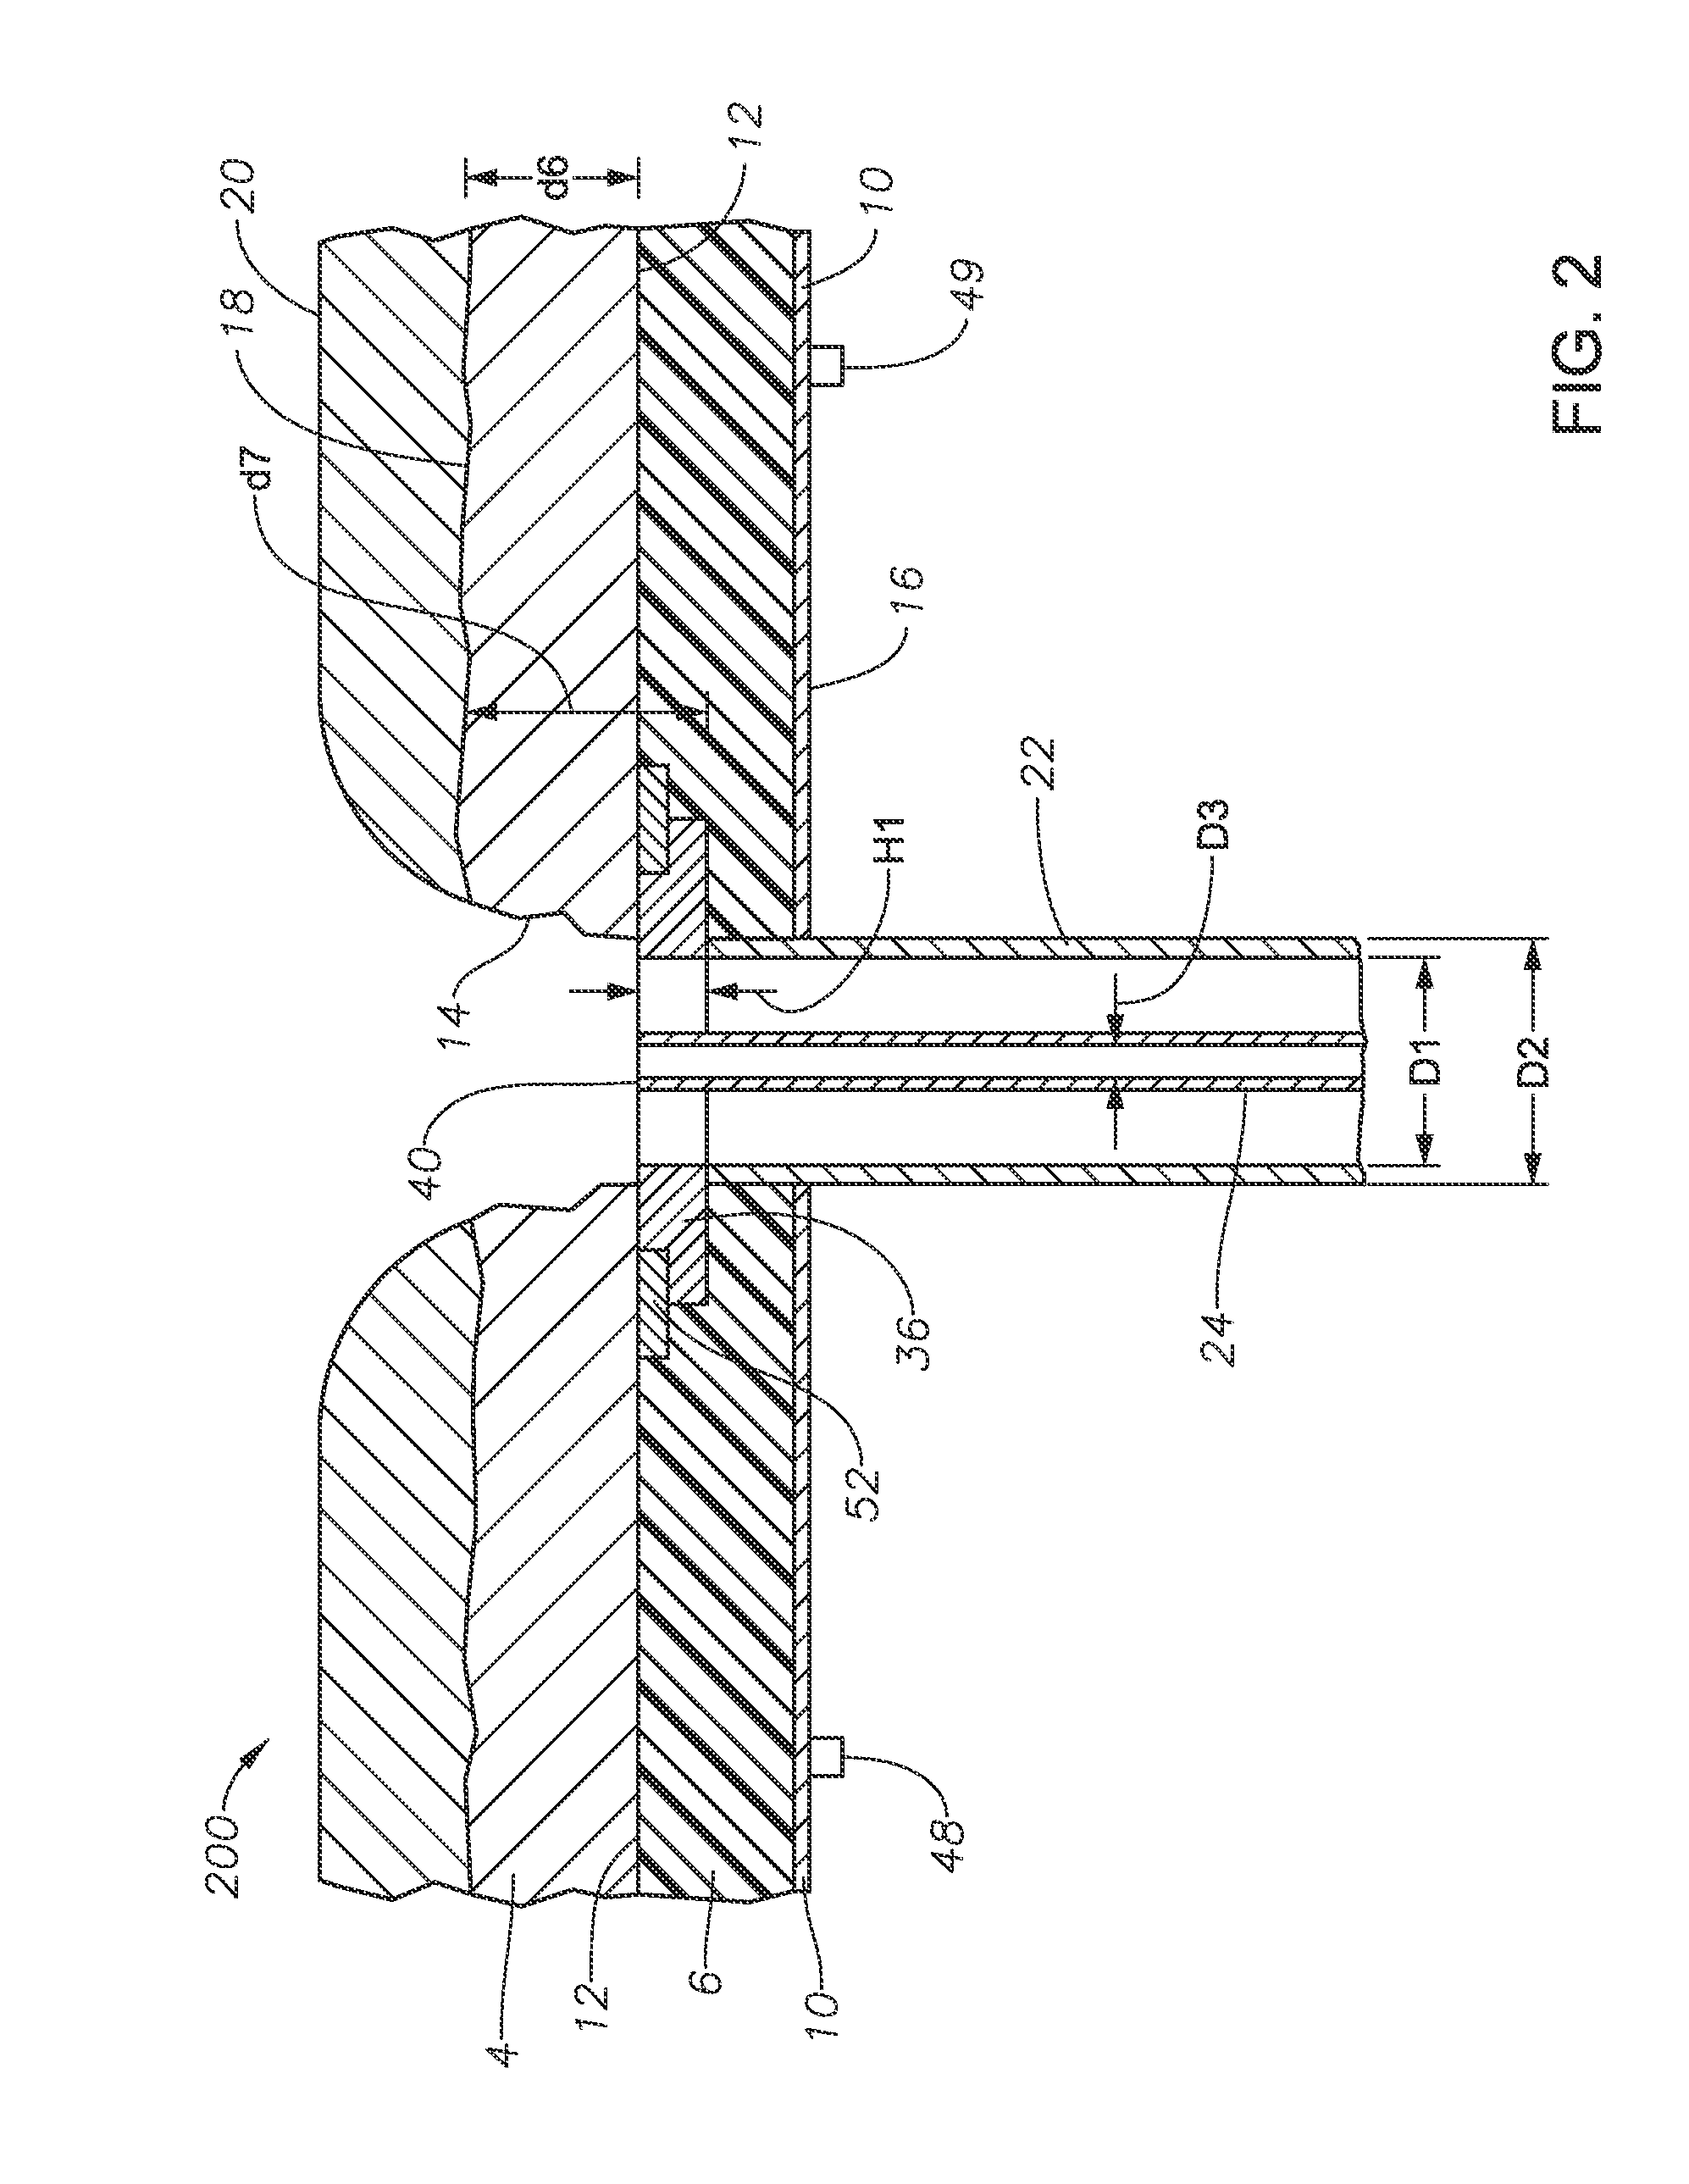 Burner panels including dry-tip burners, submerged combustion melters, and methods